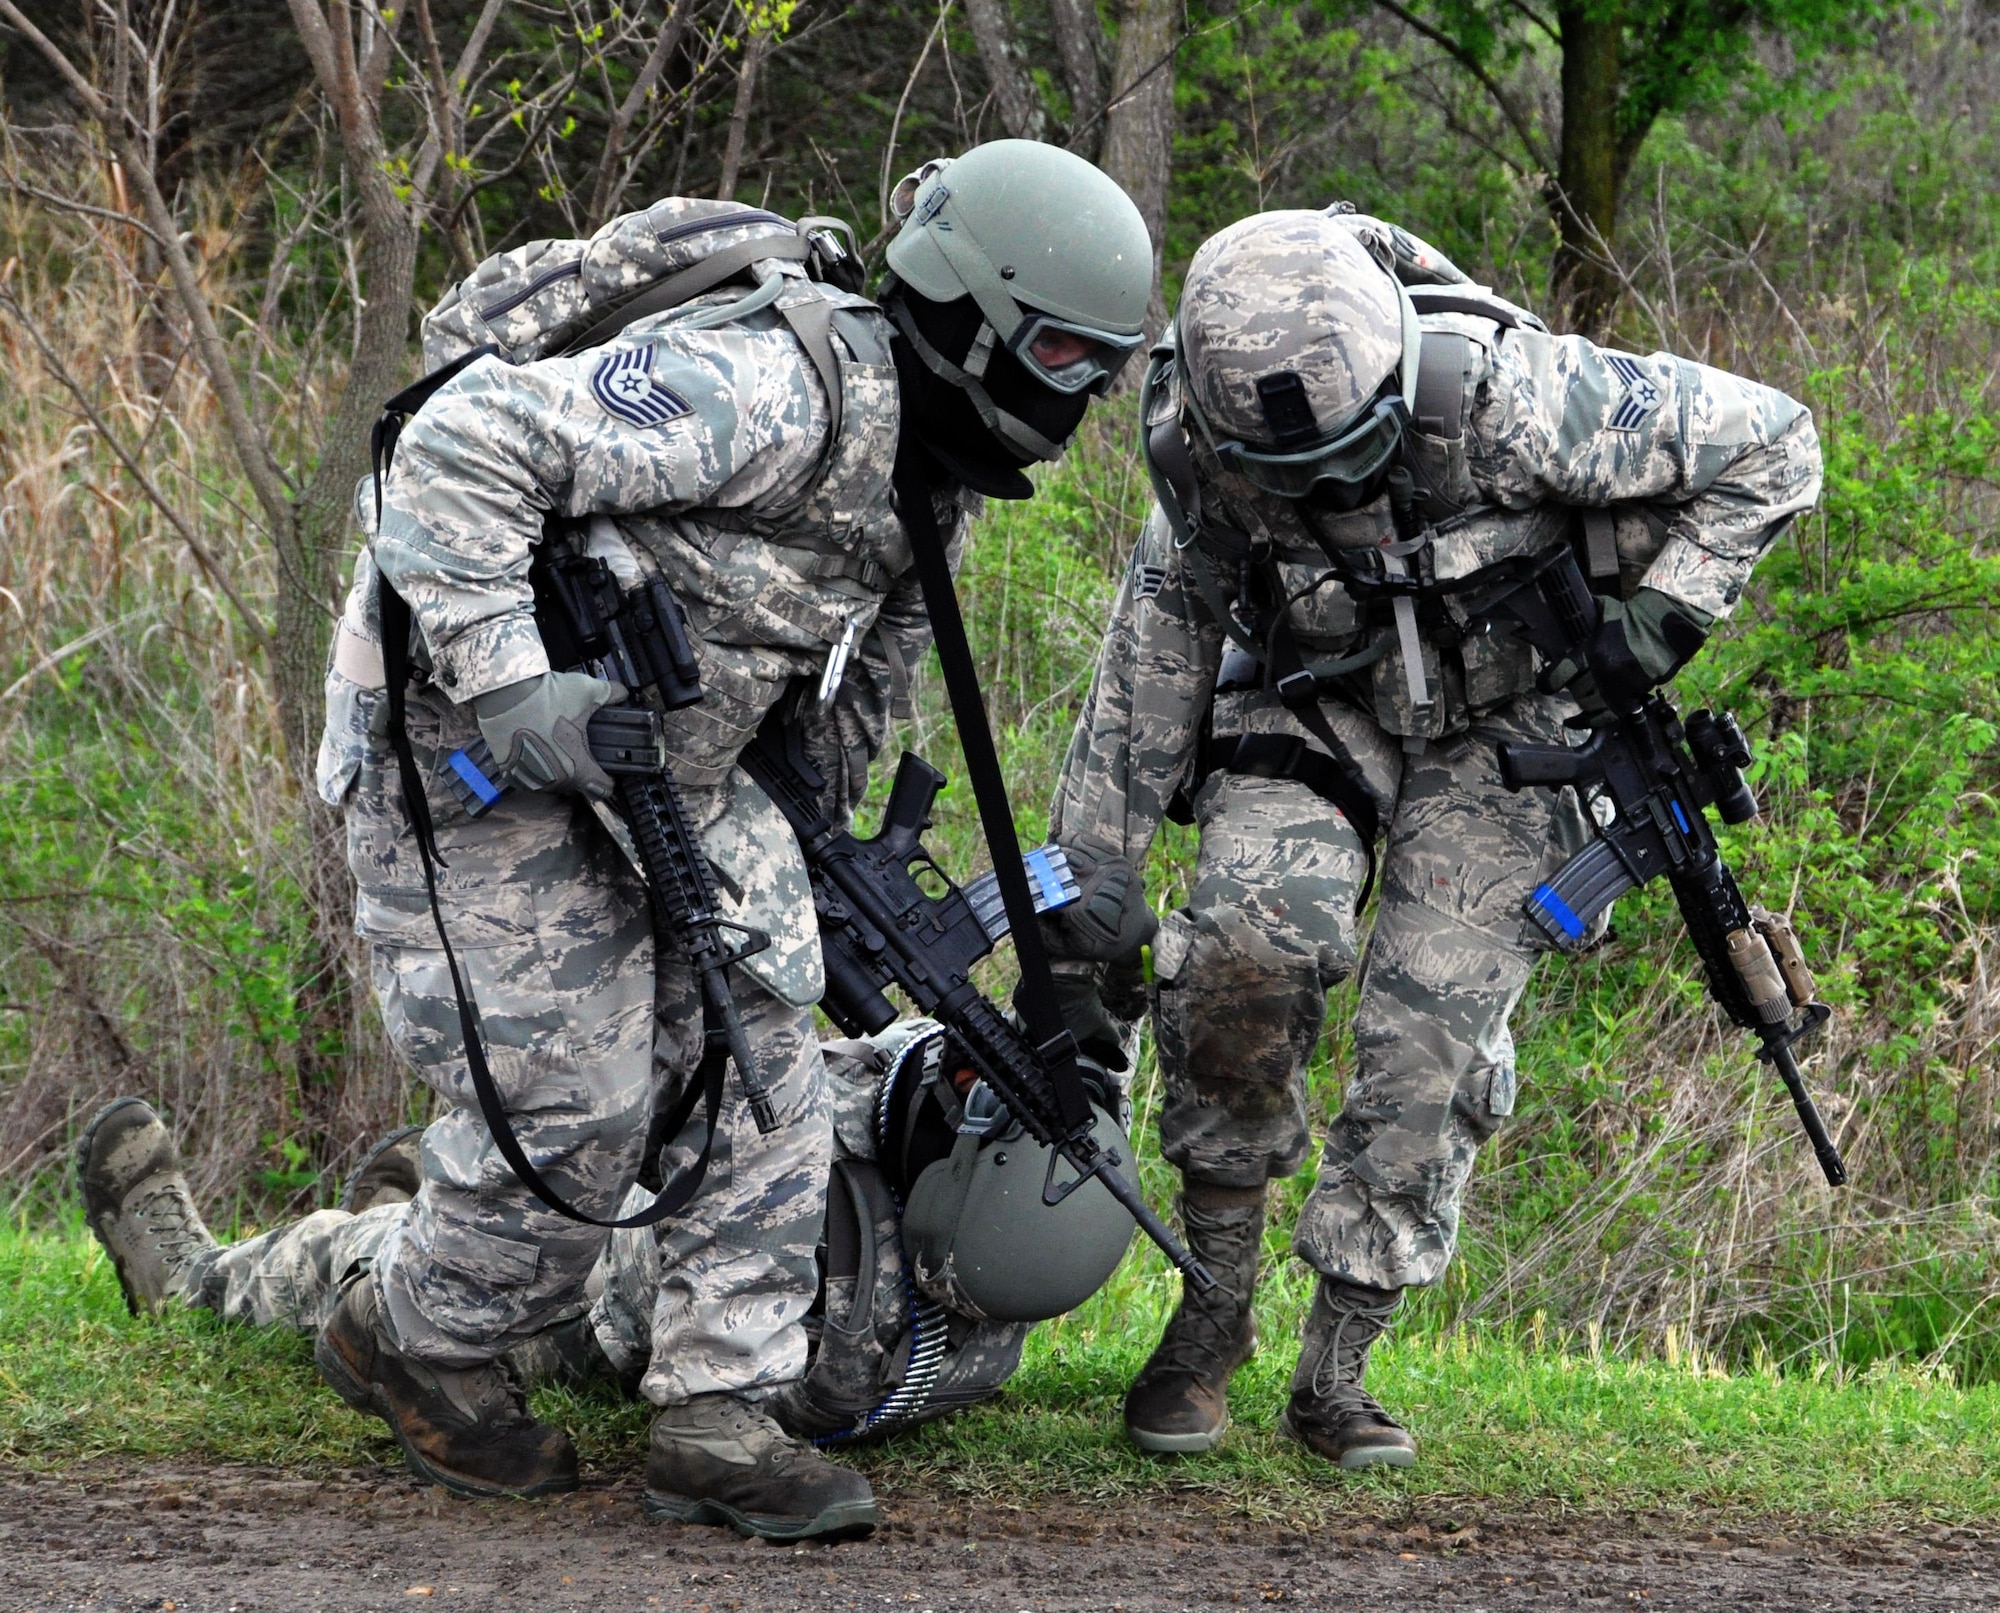 Members of the 931st Security Forces Squadron and 931st Civil Engineer Squadron pulls a "wounded" Airman to safety during a combat training exercise at Camp Gruber Training Center, Okla., April 15, 2015.  More than 80 members of the 931 SFS and 931 CES participated in ten days of training at Camp Gruber, which included  land navigation, weapons training, tactical movements, convoy operations, base defense, room clearing procedures, foot patrols, military operations on urban terrain (MOUT) and combat lifesaving. (U.S. Air Force photo by Capt. Zach Anderson)